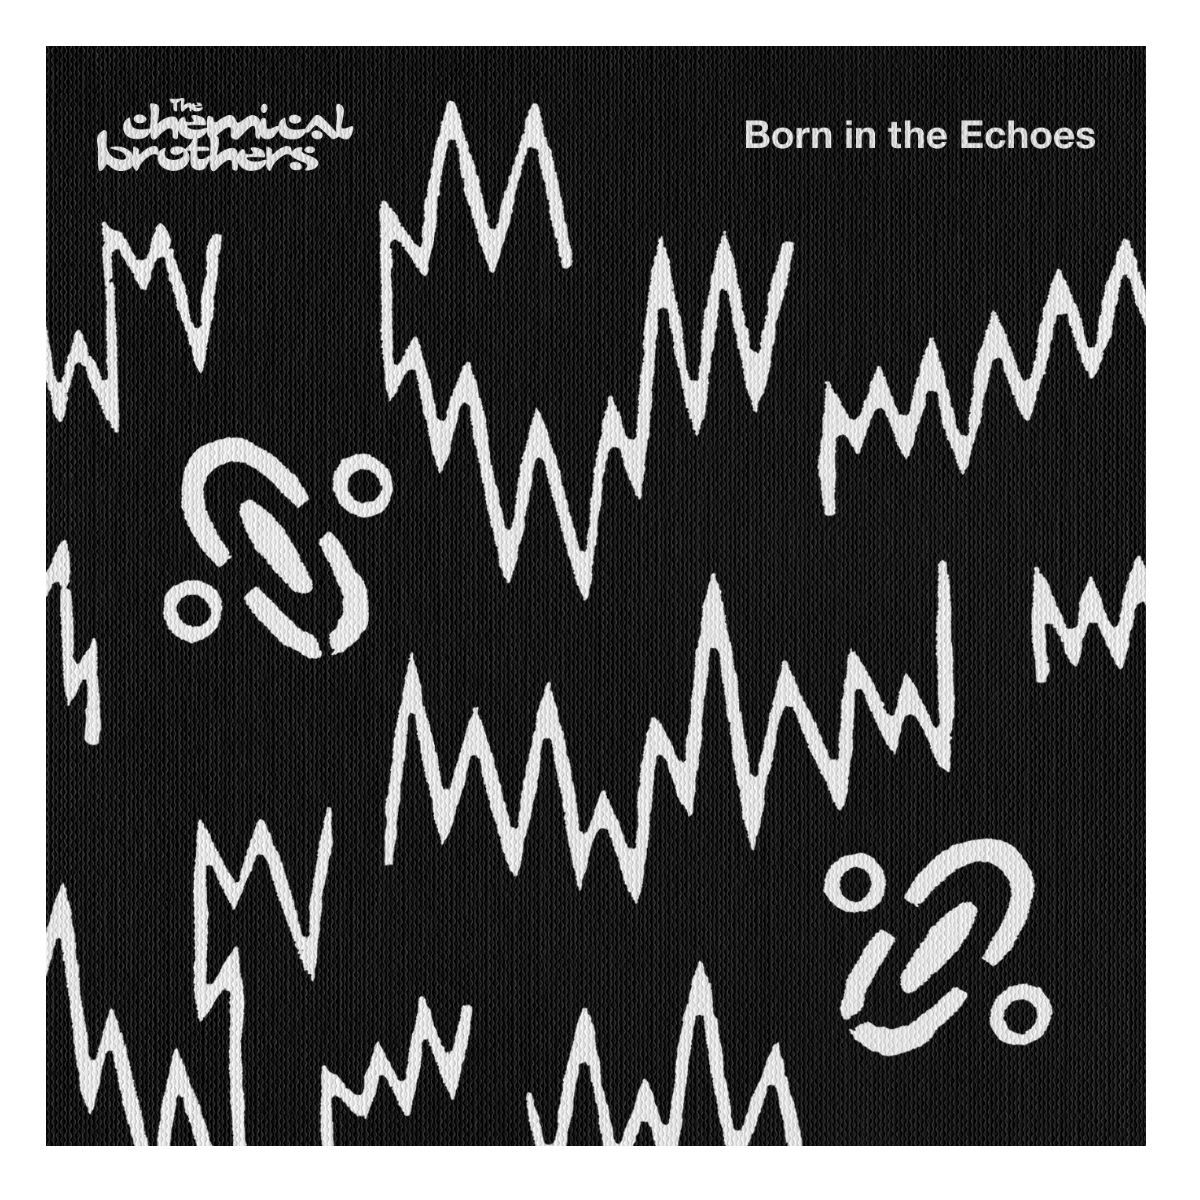 Chronique album : The Chemical Brothers - Born In The Echoes - Sound Of  Violence